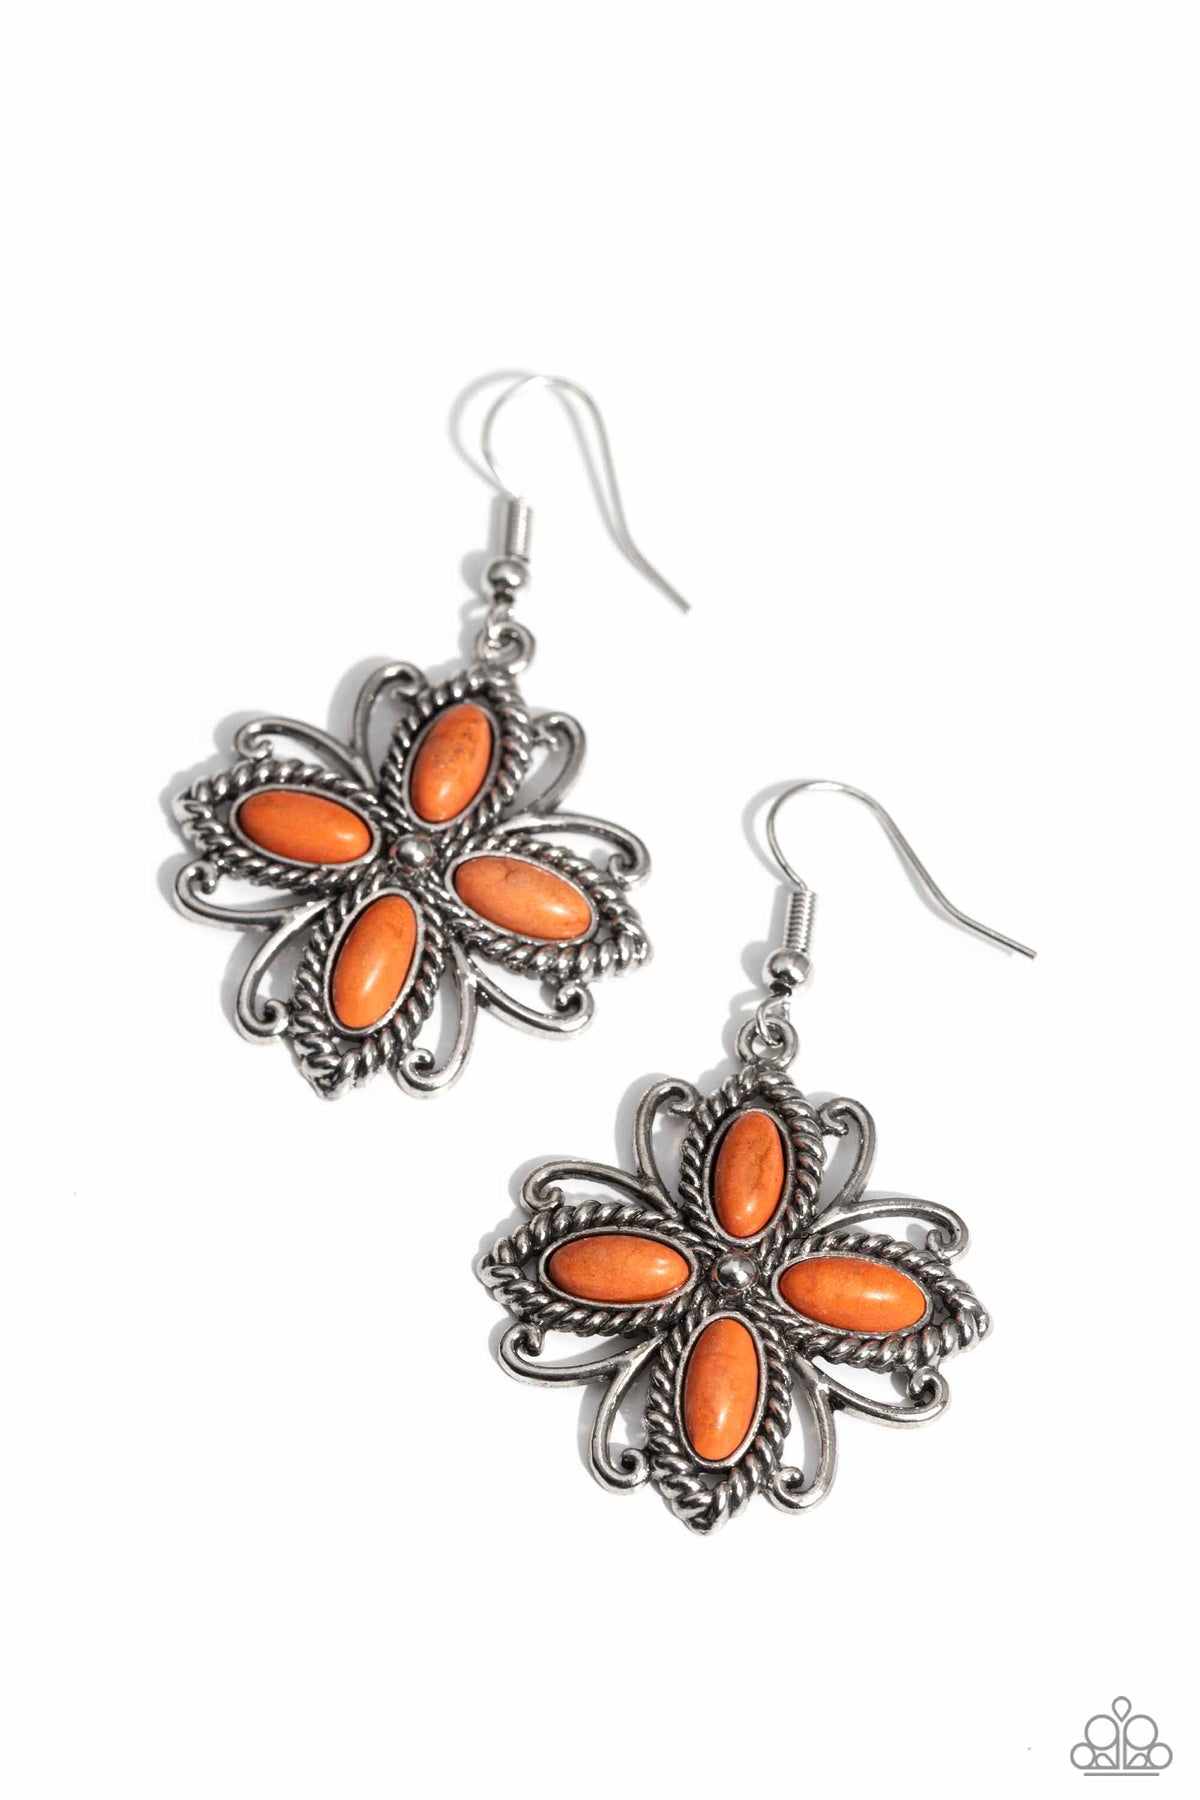 Badlands Ballad Orange Stone Floral Earrings - Paparazzi Accessories- lightbox - CarasShop.com - $5 Jewelry by Cara Jewels